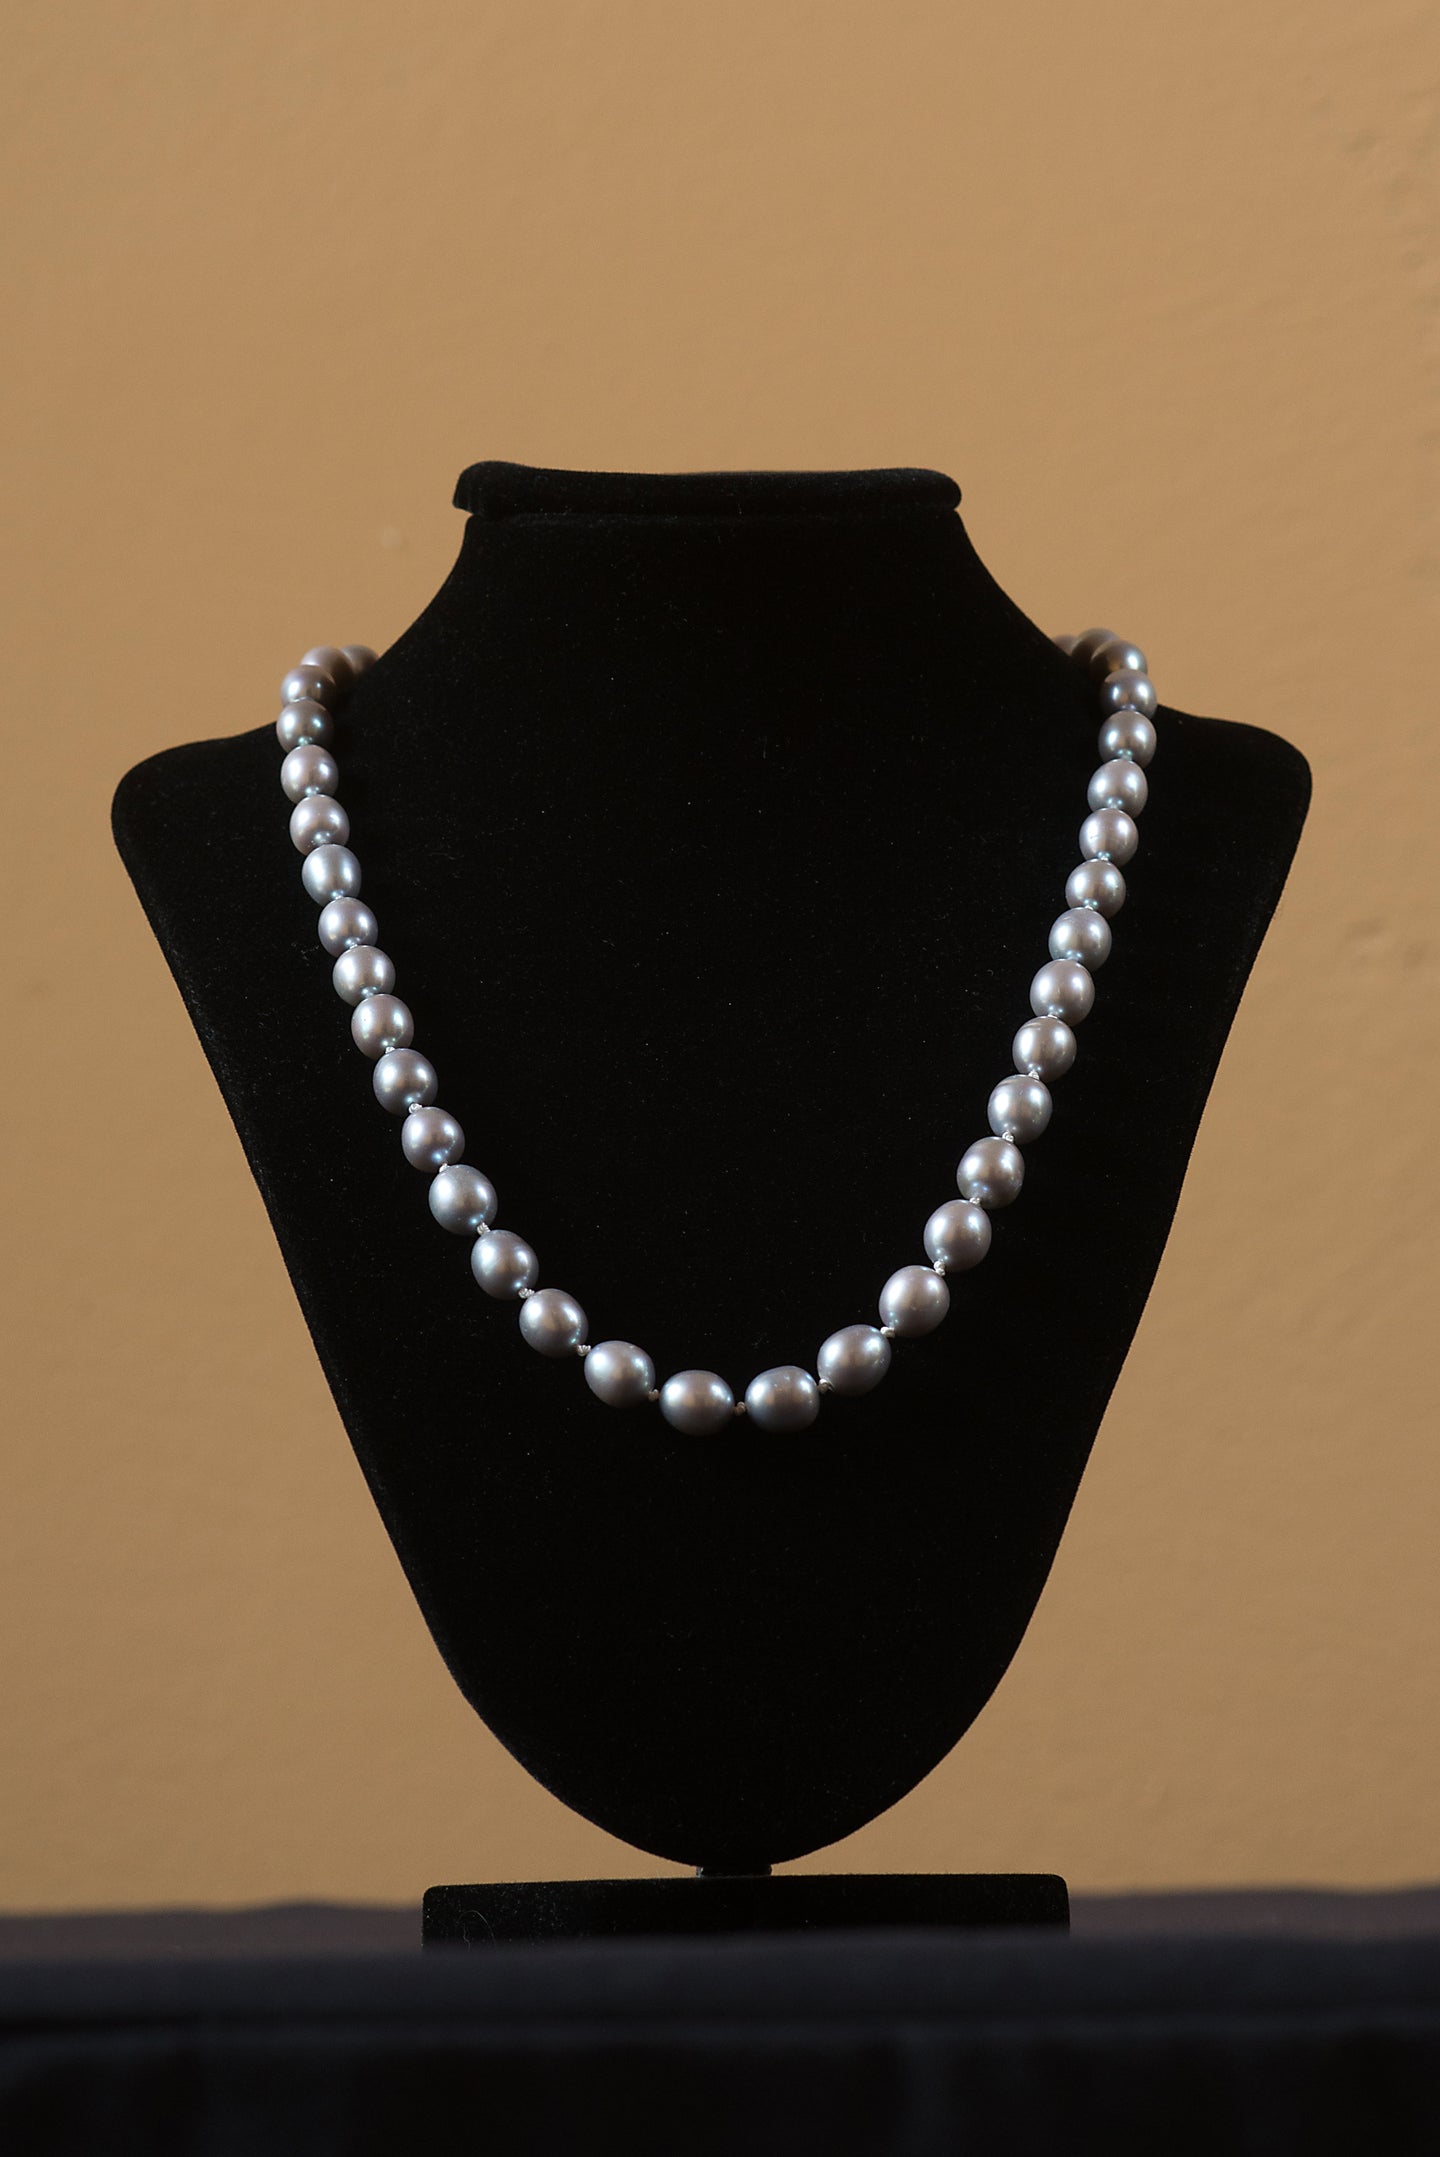 Necklace - Grey Pearls, Sterling Silver